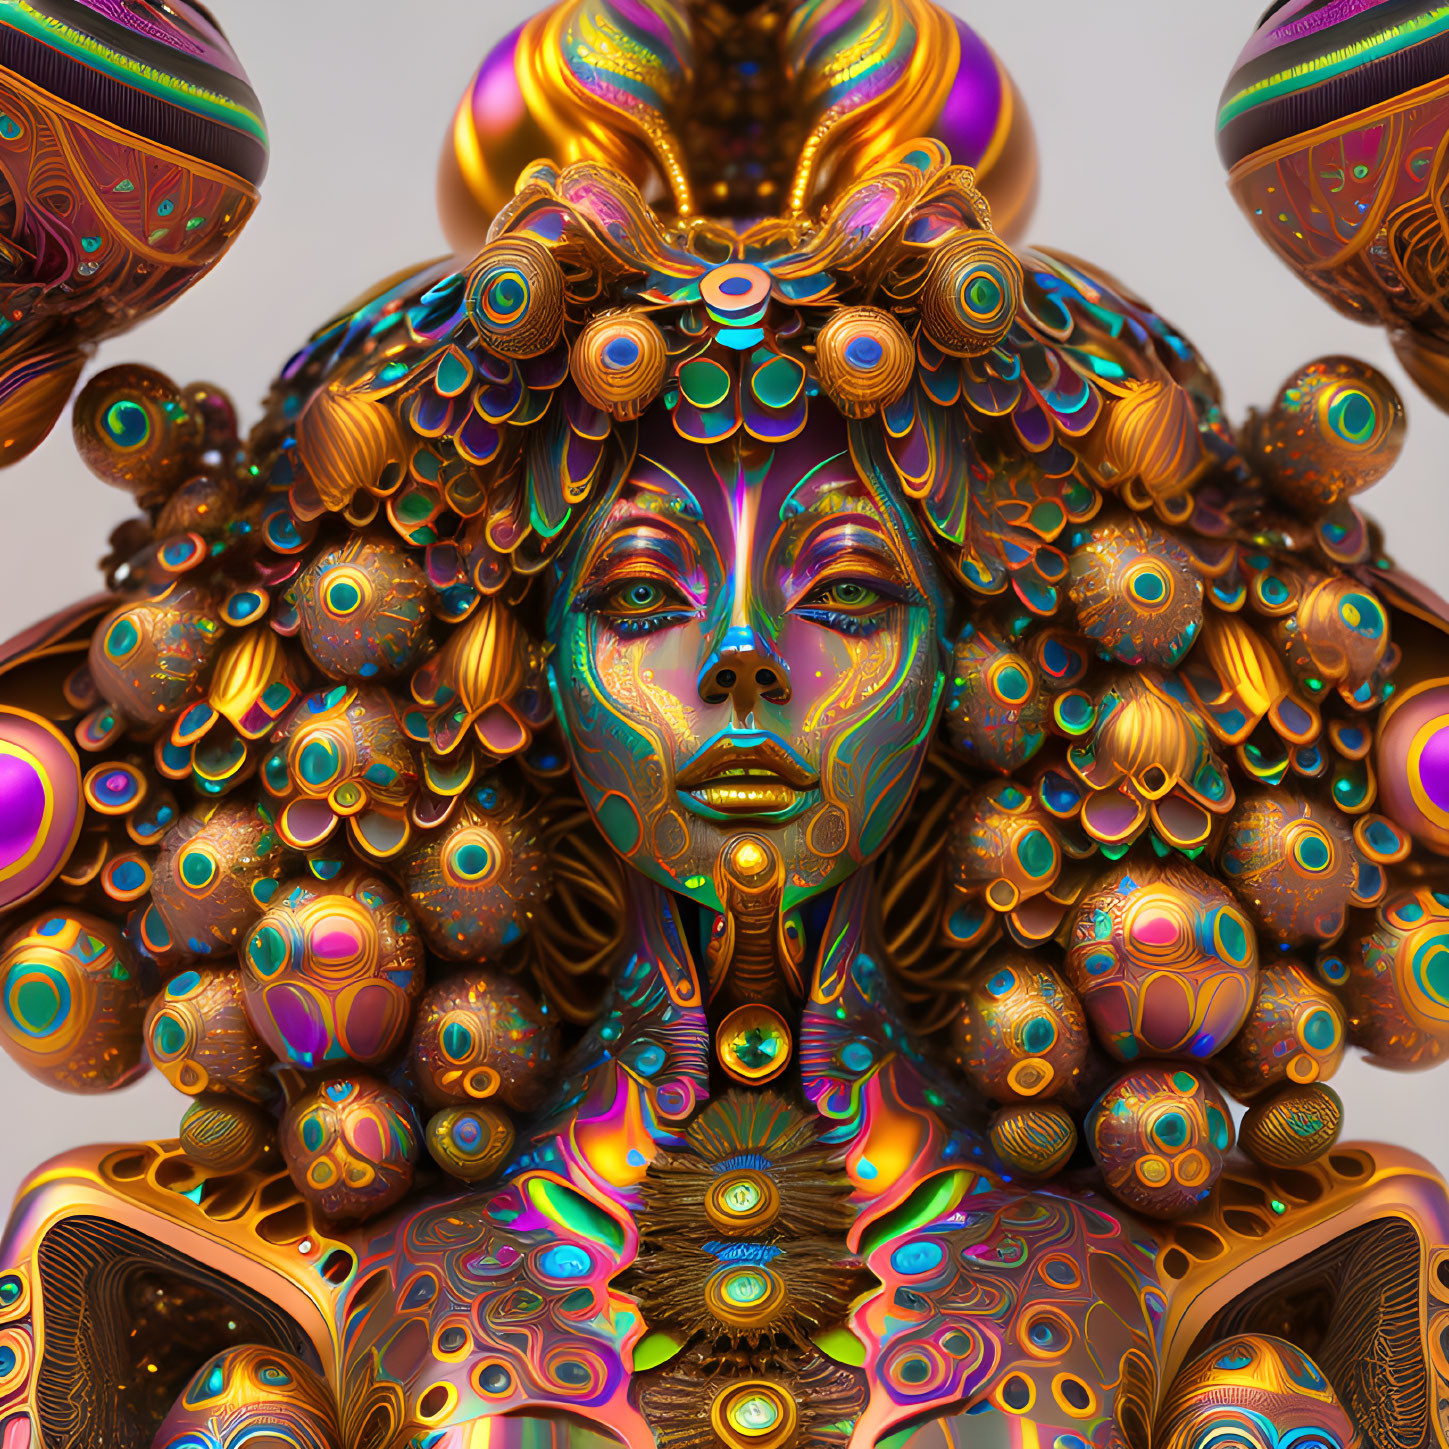 Colorful digital artwork of stylized female figure with intricate patterns and metallic textures